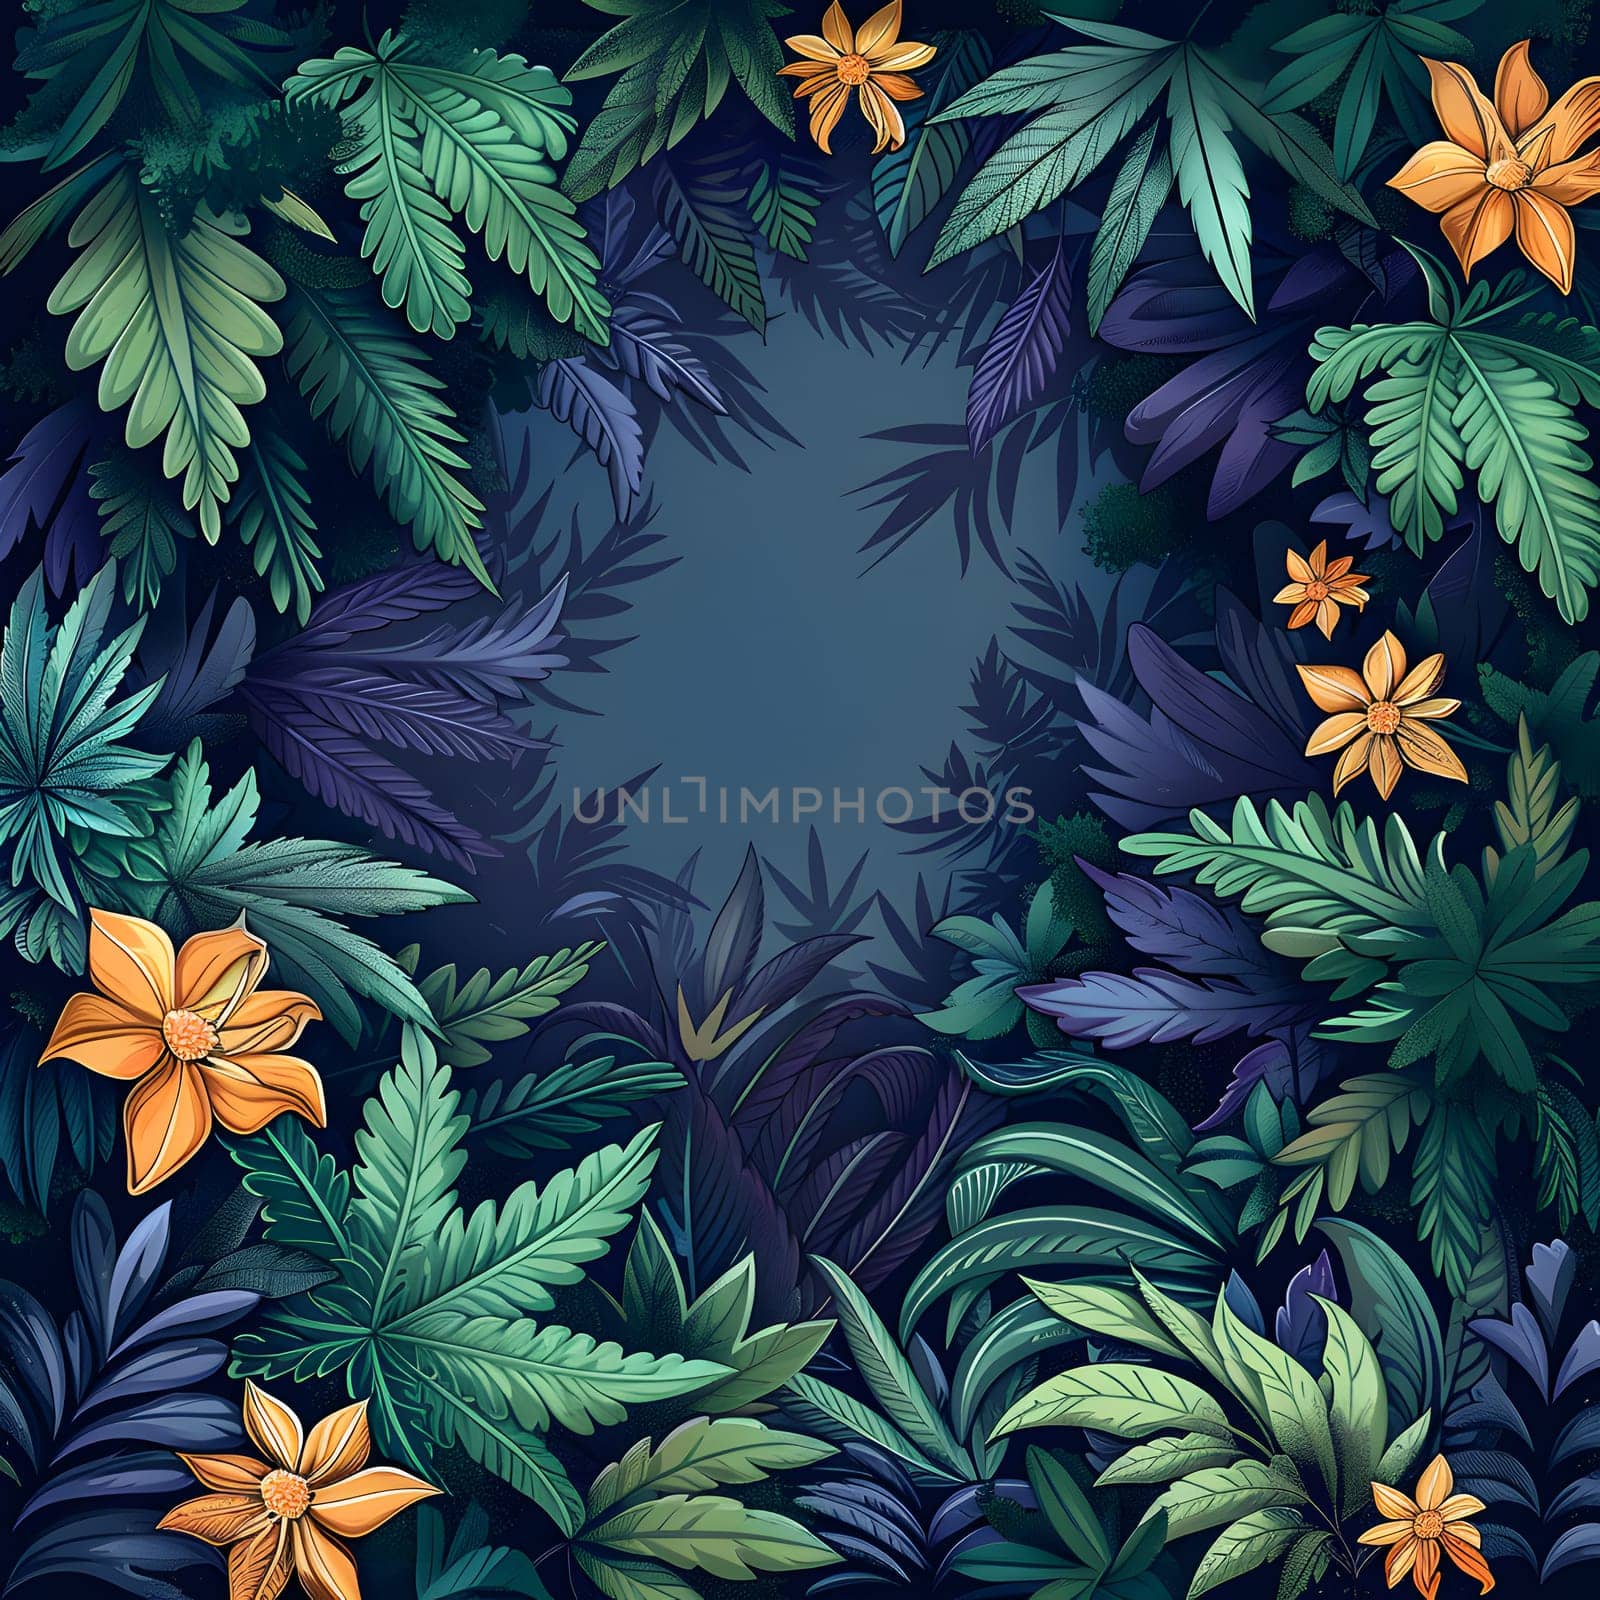 Lush tropical forest teeming with green vegetation and colorful flowers by Nadtochiy